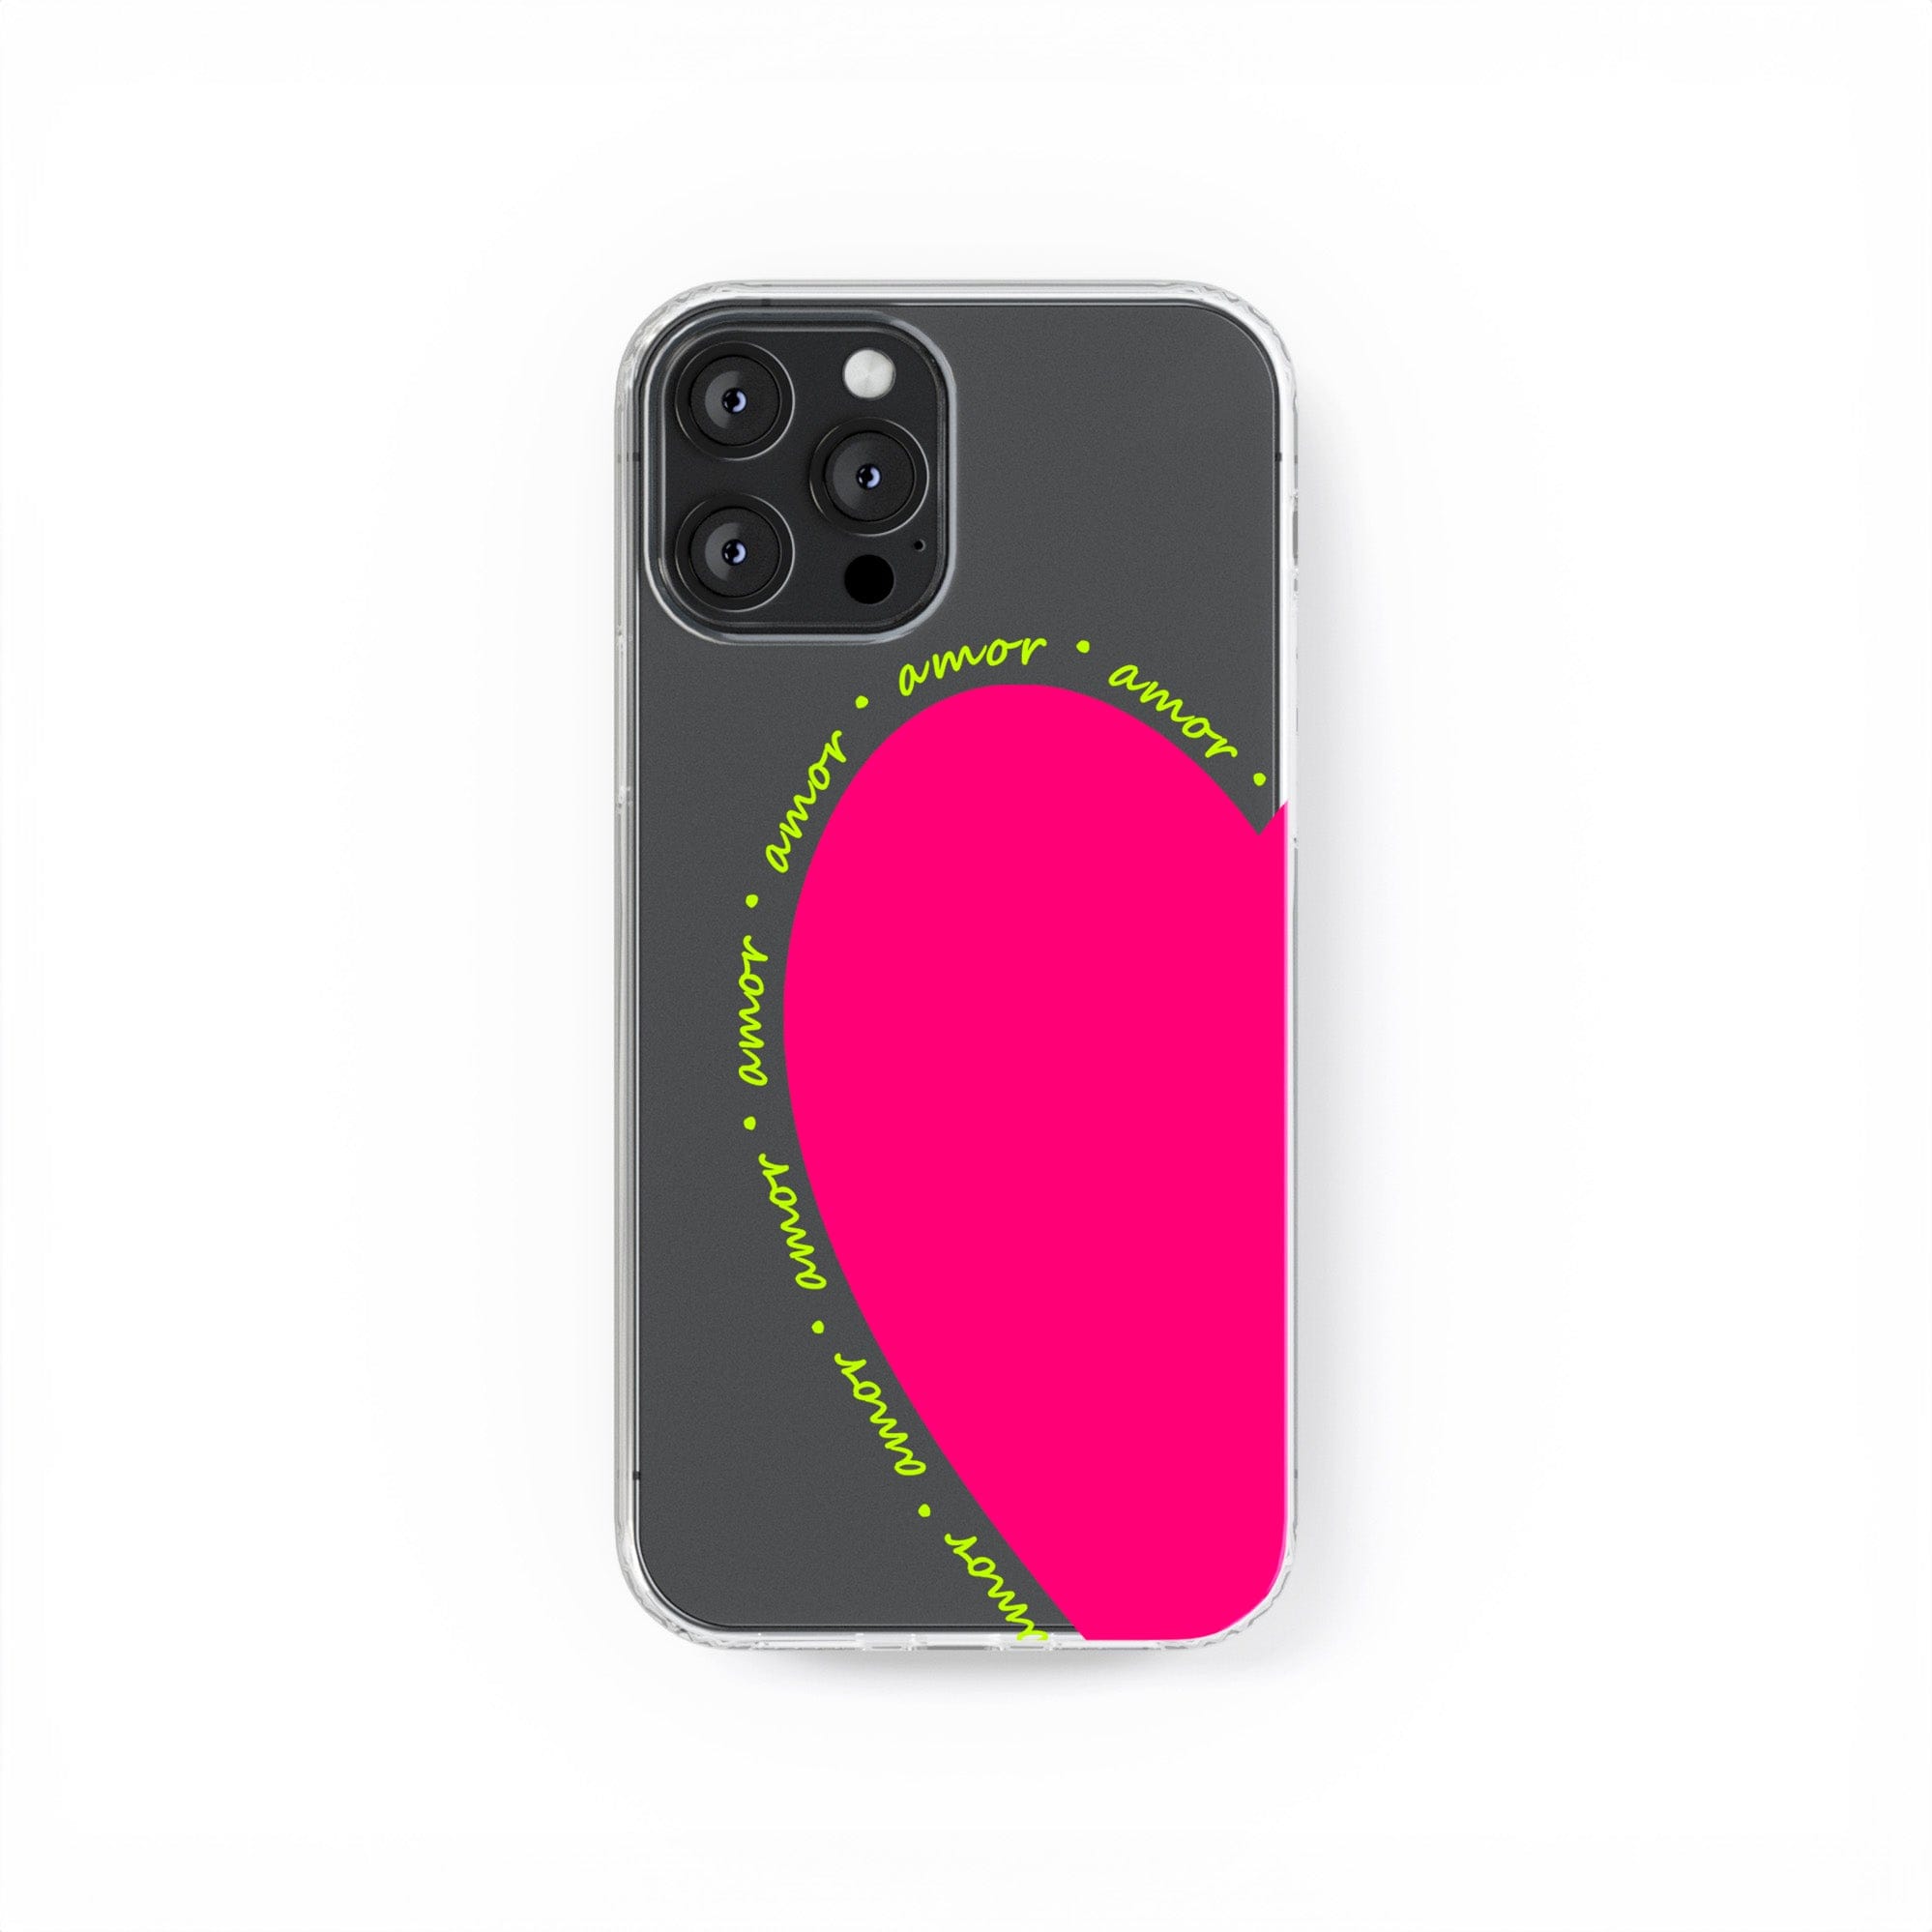 Transparent silicone case "Pink amore"